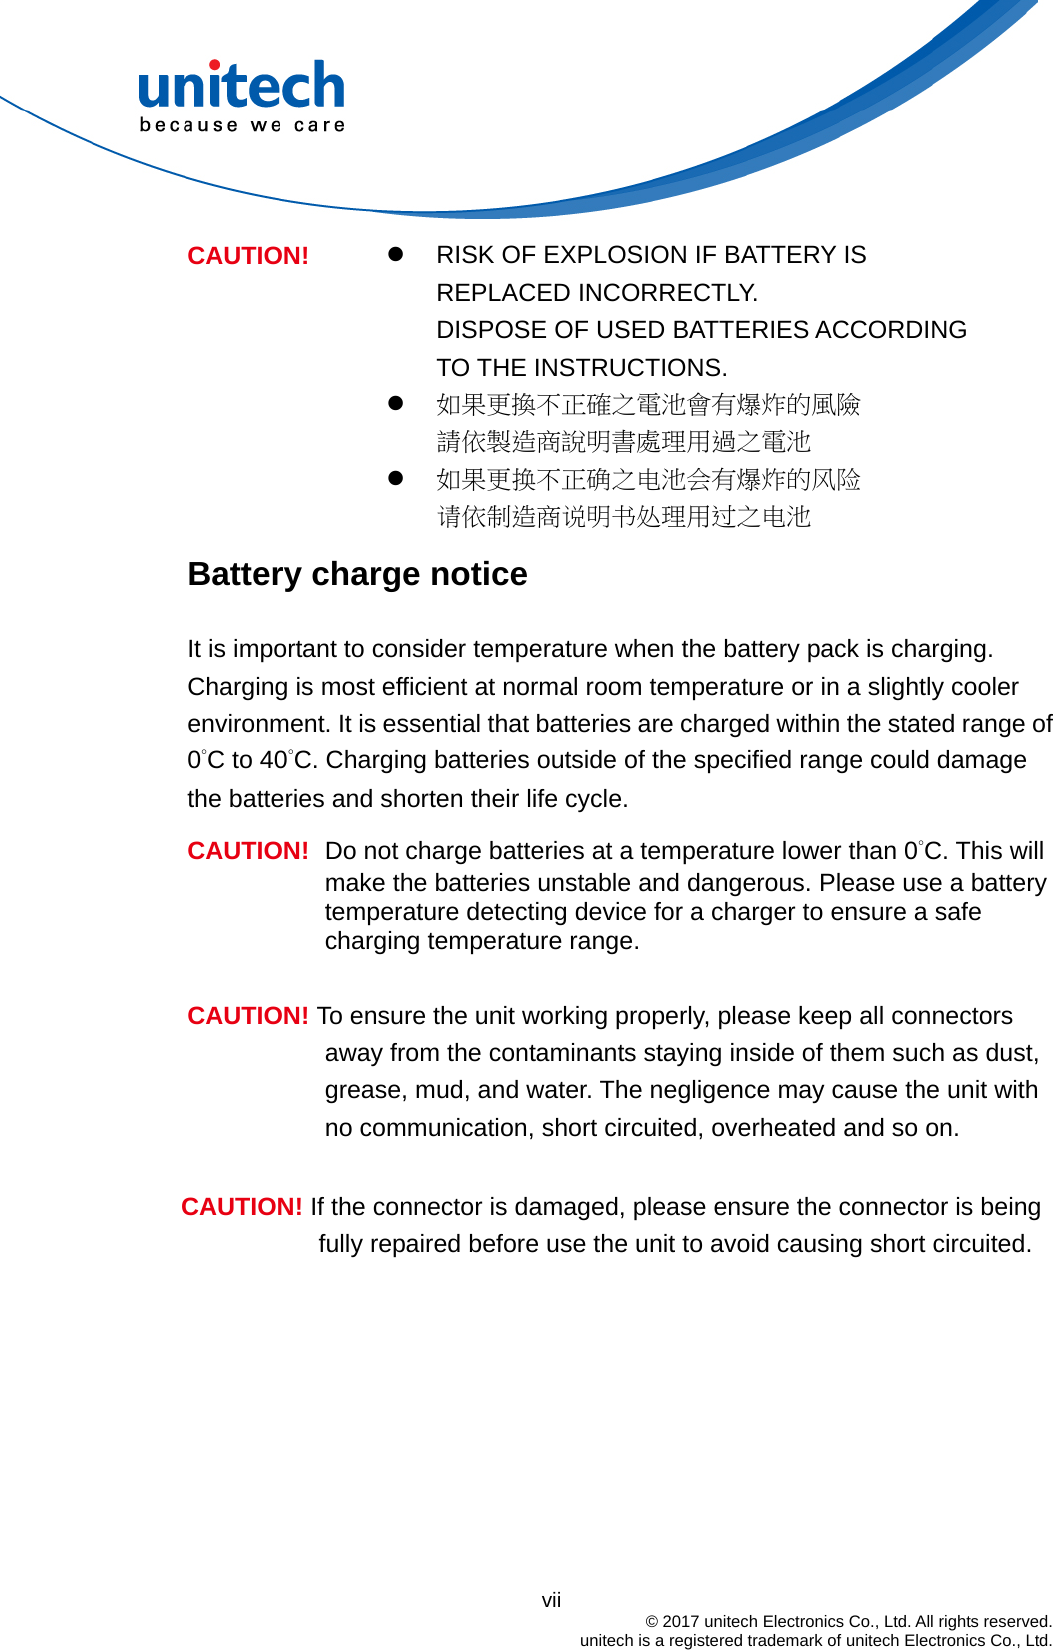                                          vii  © 2017 unitech Electronics Co., Ltd. All rights reserved.   unitech is a registered trademark of unitech Electronics Co., Ltd.   RISK OF EXPLOSION IF BATTERY IS REPLACED INCORRECTLY.   DISPOSE OF USED BATTERIES ACCORDING TO THE INSTRUCTIONS.  如果更換不正確之電池會有爆炸的風險 請依製造商說明書處理用過之電池 CAUTION!  如果更换不正确之电池会有爆炸的风险 请依制造商说明书处理用过之电池 Battery charge notice It is important to consider temperature when the battery pack is charging. Charging is most efficient at normal room temperature or in a slightly cooler environment. It is essential that batteries are charged within the stated range of 0°C to 40°C. Charging batteries outside of the specified range could damage the batteries and shorten their life cycle. CAUTION!  Do not charge batteries at a temperature lower than 0°C. This will make the batteries unstable and dangerous. Please use a battery temperature detecting device for a charger to ensure a safe charging temperature range.  CAUTION! To ensure the unit working properly, please keep all connectors away from the contaminants staying inside of them such as dust, grease, mud, and water. The negligence may cause the unit with no communication, short circuited, overheated and so on.  CAUTION! If the connector is damaged, please ensure the connector is being fully repaired before use the unit to avoid causing short circuited.   